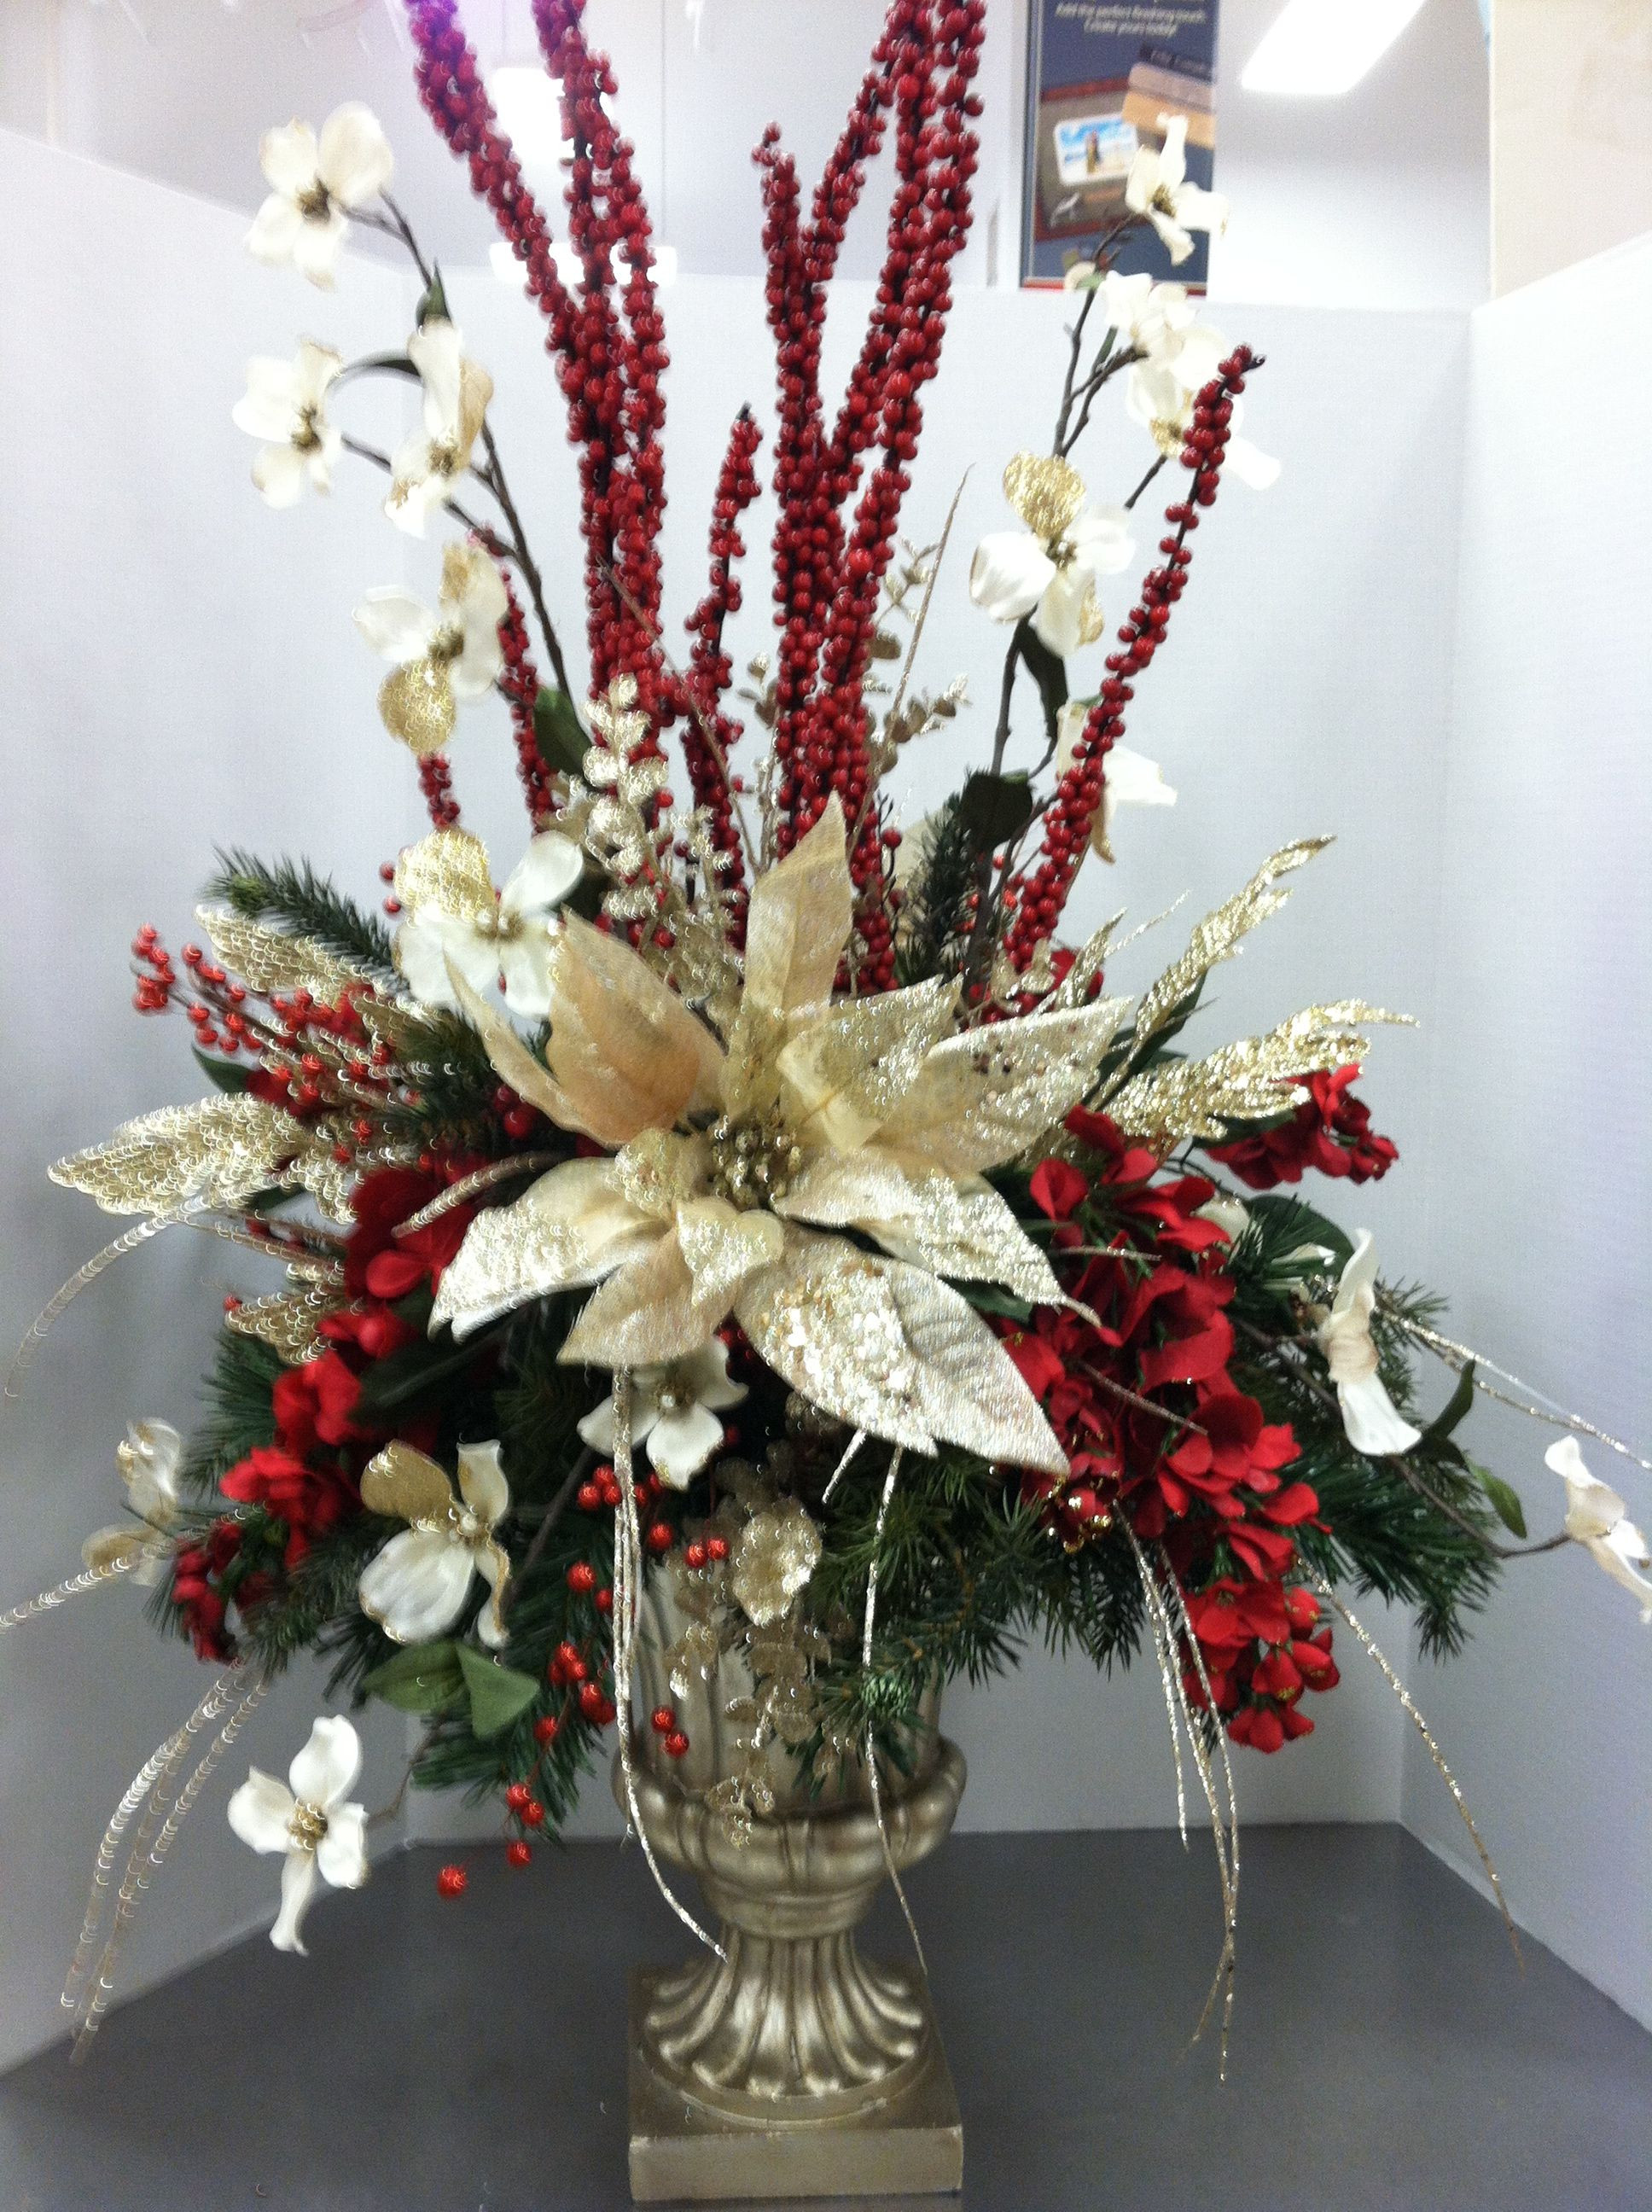 Christmas Flower Decorations
 Trina this would be beautiful for Christmas arrangement